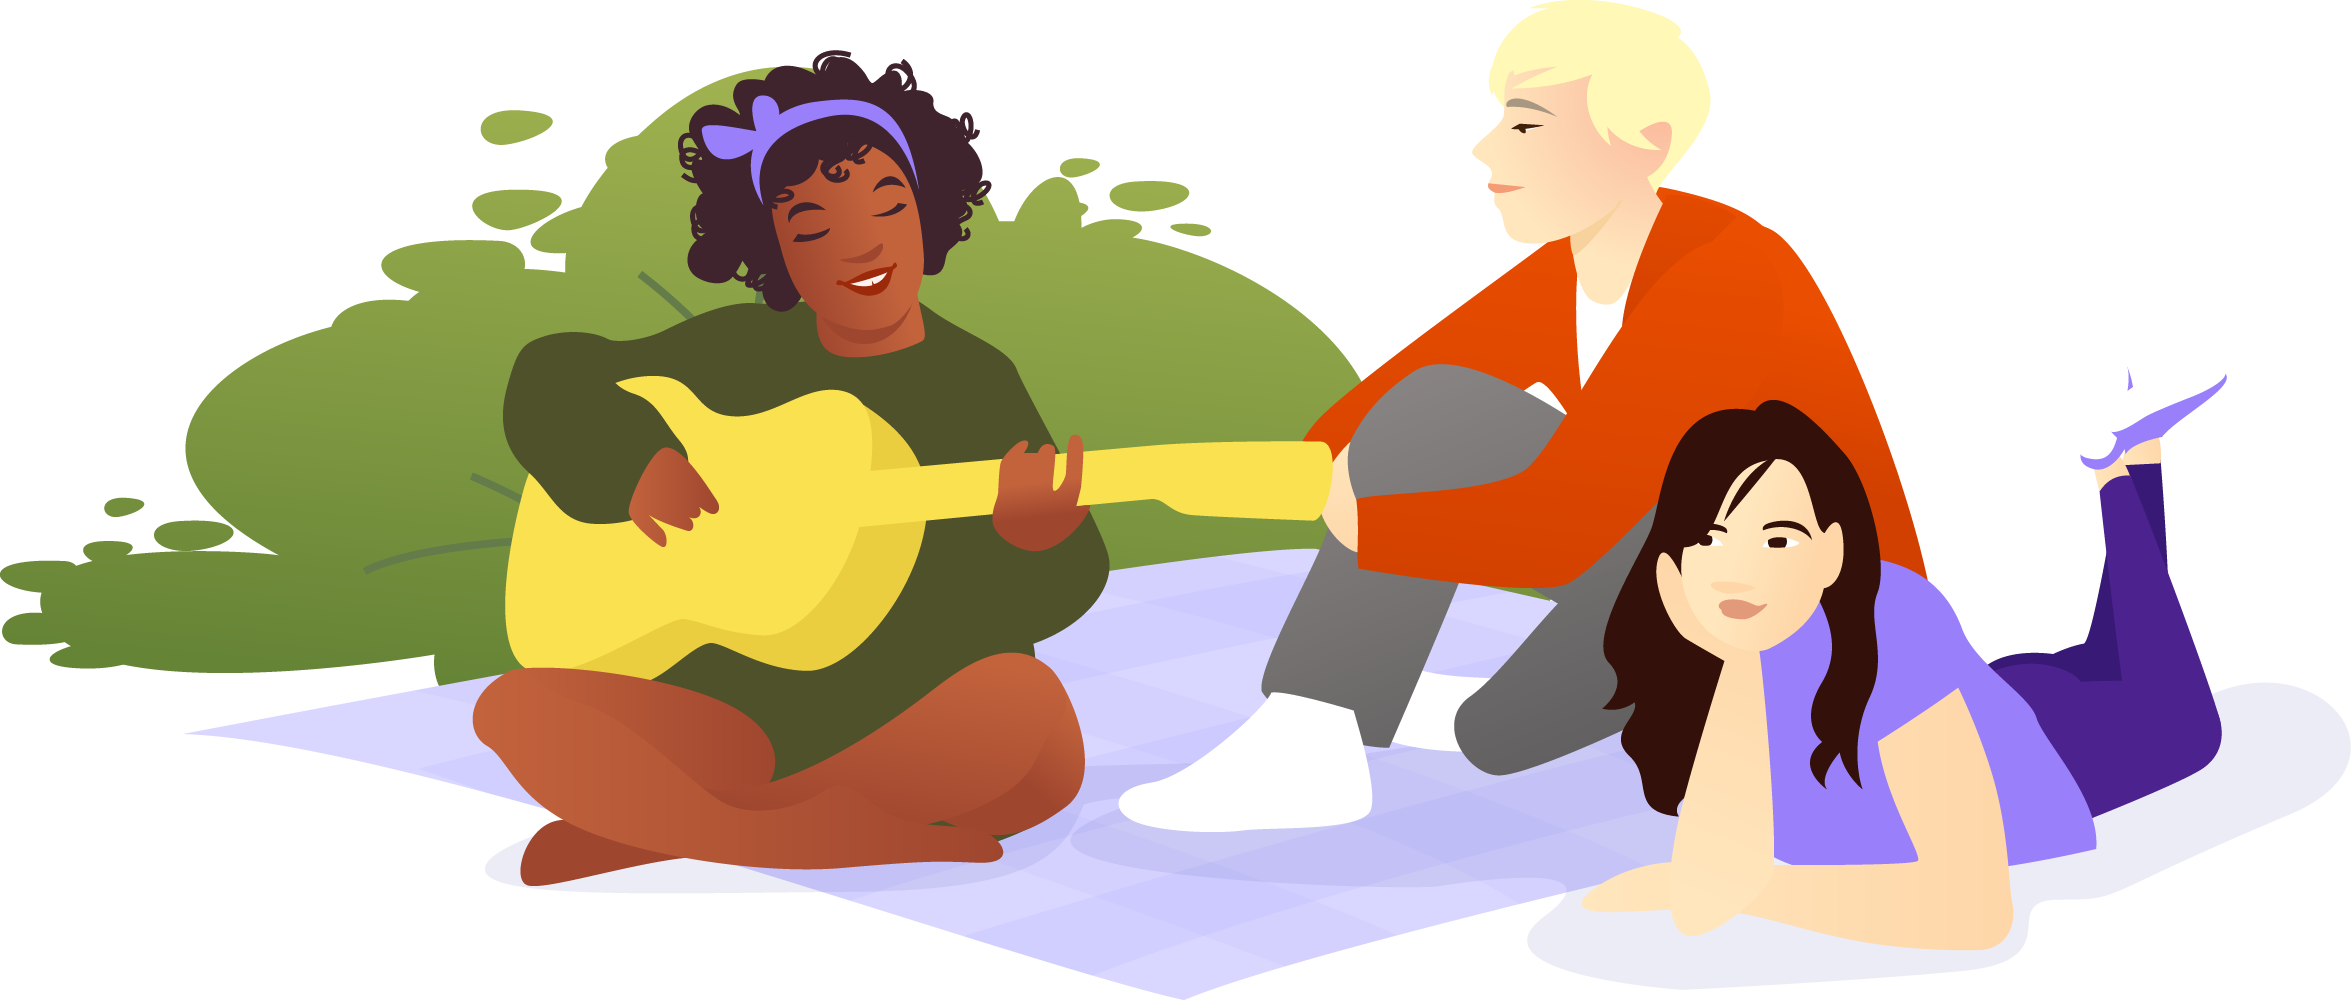 Illustration with three young people sitting on a small rock in the water. They are sitting on a purple blanket. One of the young people has a guitar in their arm, one is lying flat on their stomach with their chin resting in their hand, and one is sitting on their butt with one knee lifted and their arm around it.